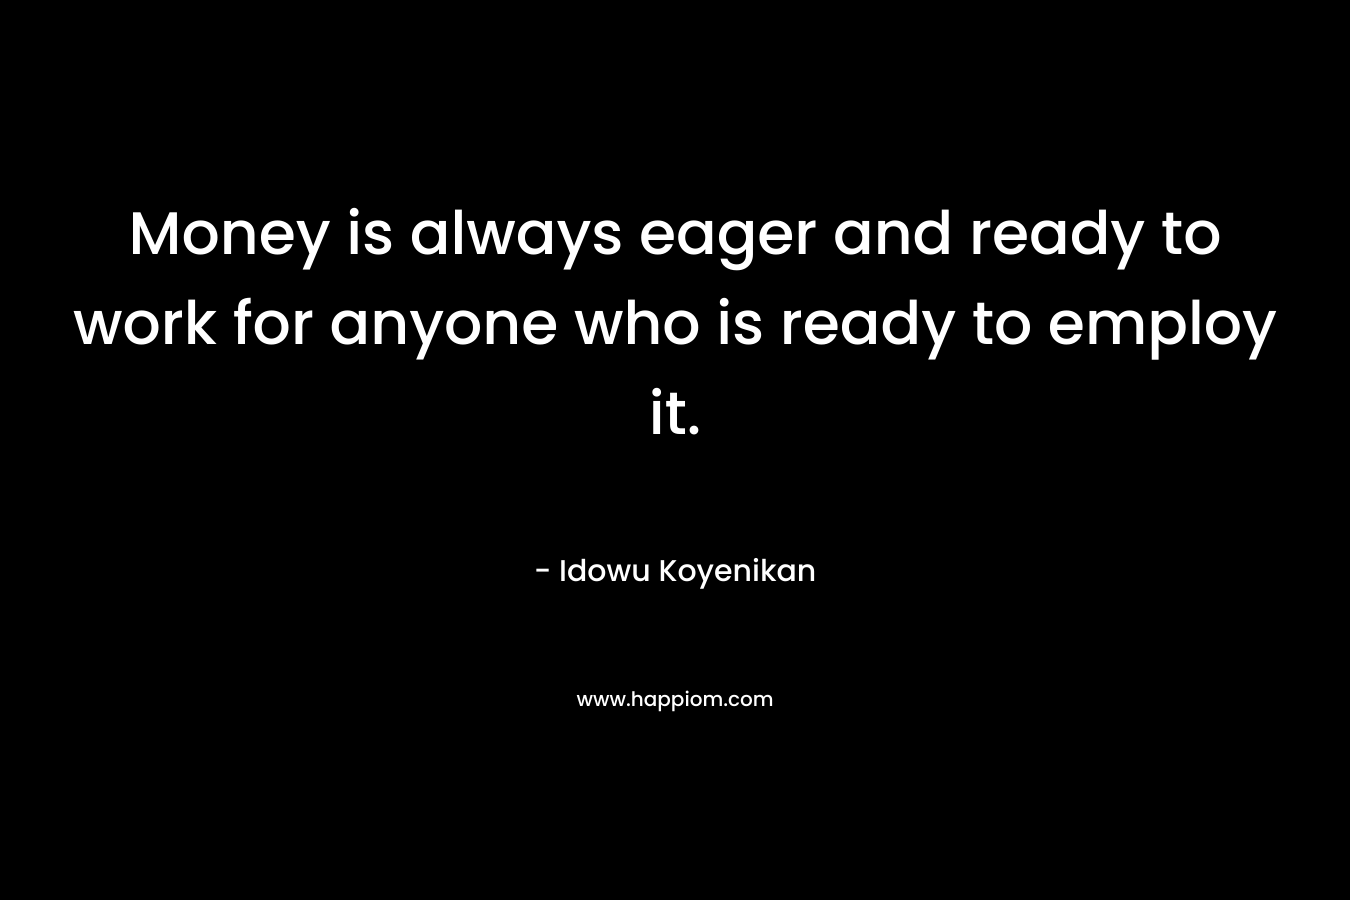 Money is always eager and ready to work for anyone who is ready to employ it. – Idowu Koyenikan